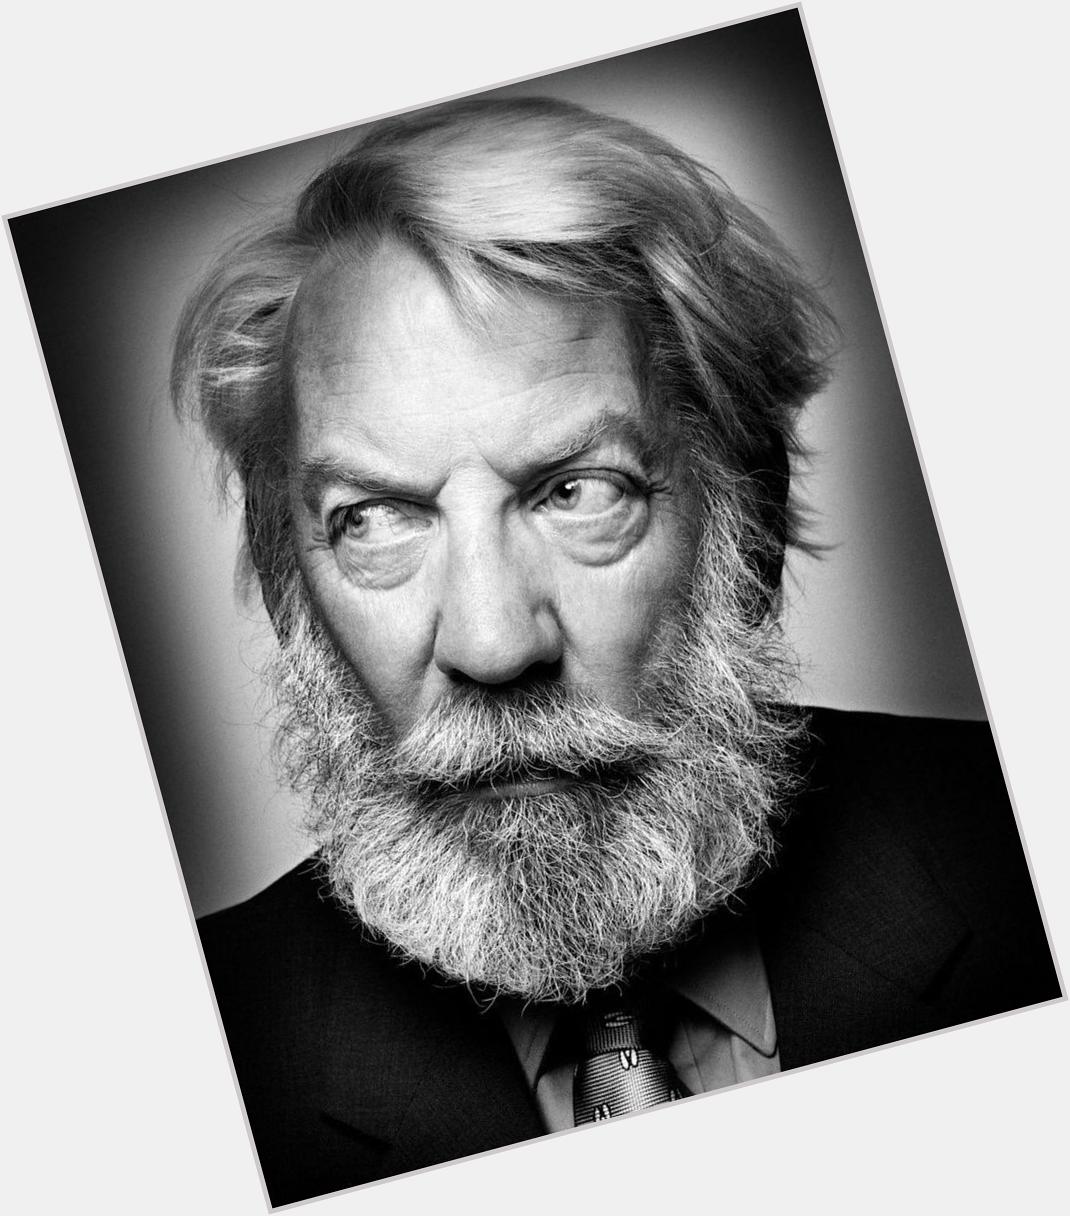 Lastly for today, but certainly not least, happy 80th birthday to film legend, Donald Sutherland 